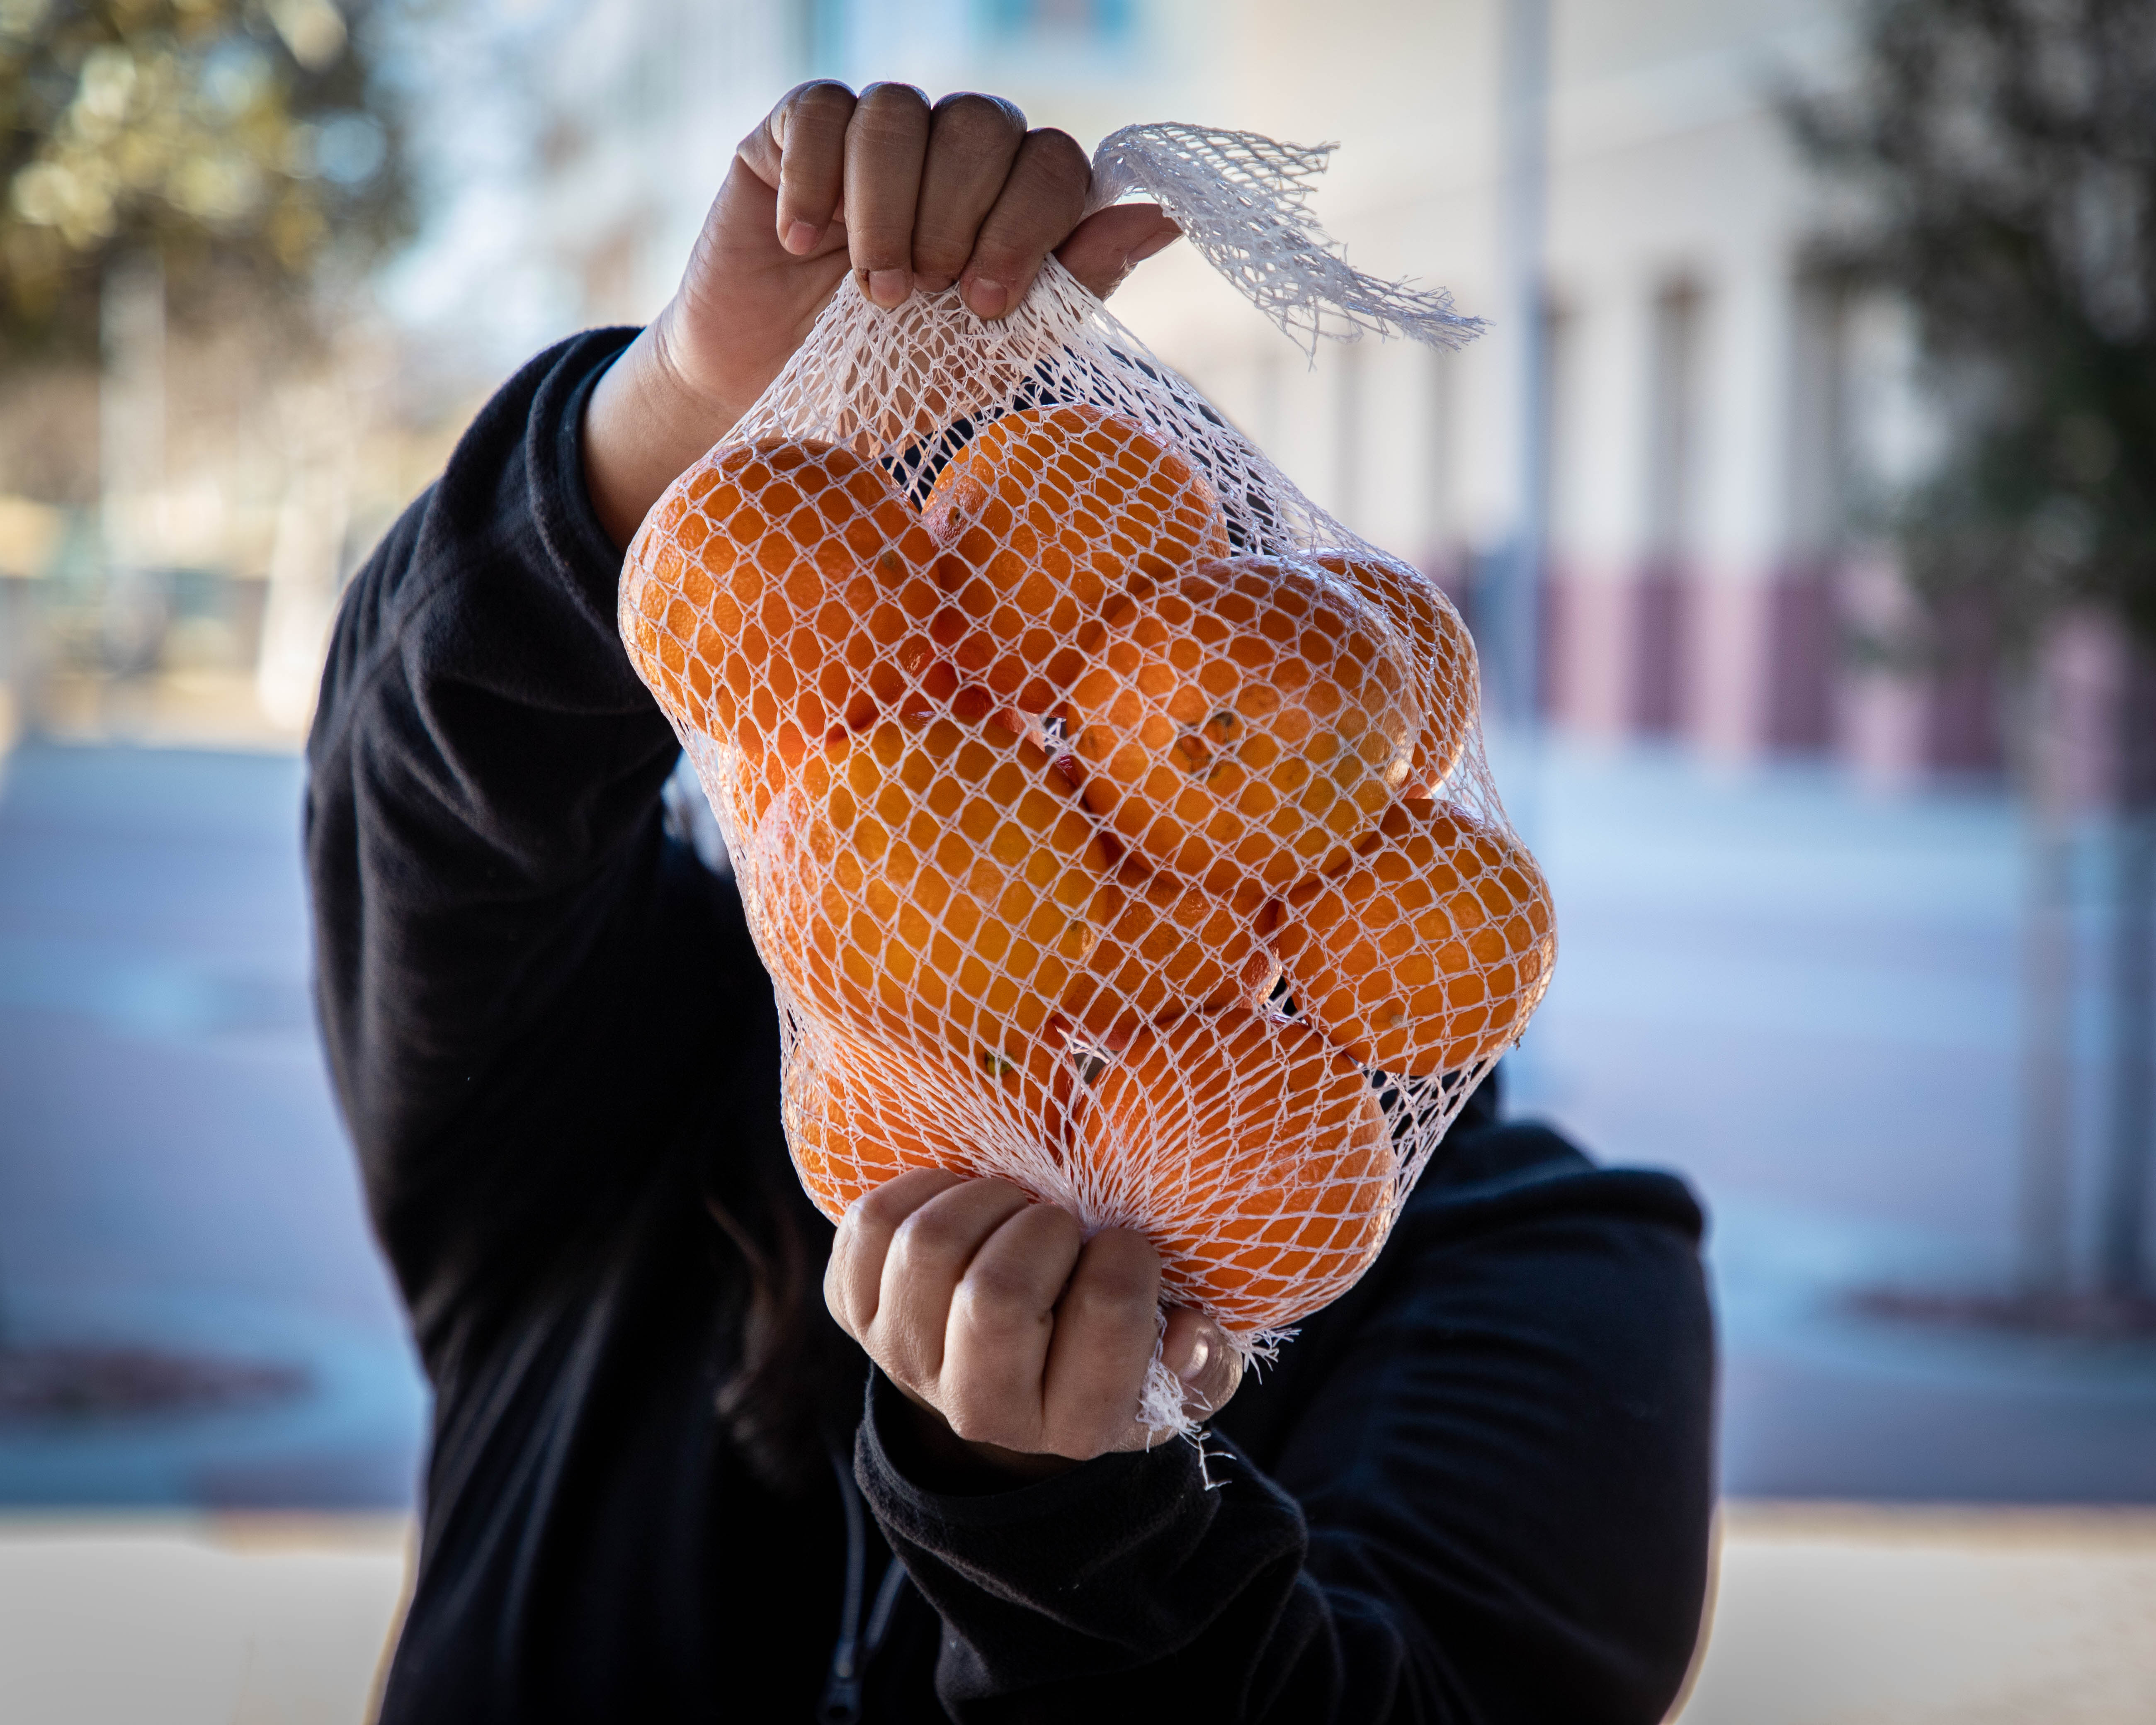 student holding bag of oranges, covering face